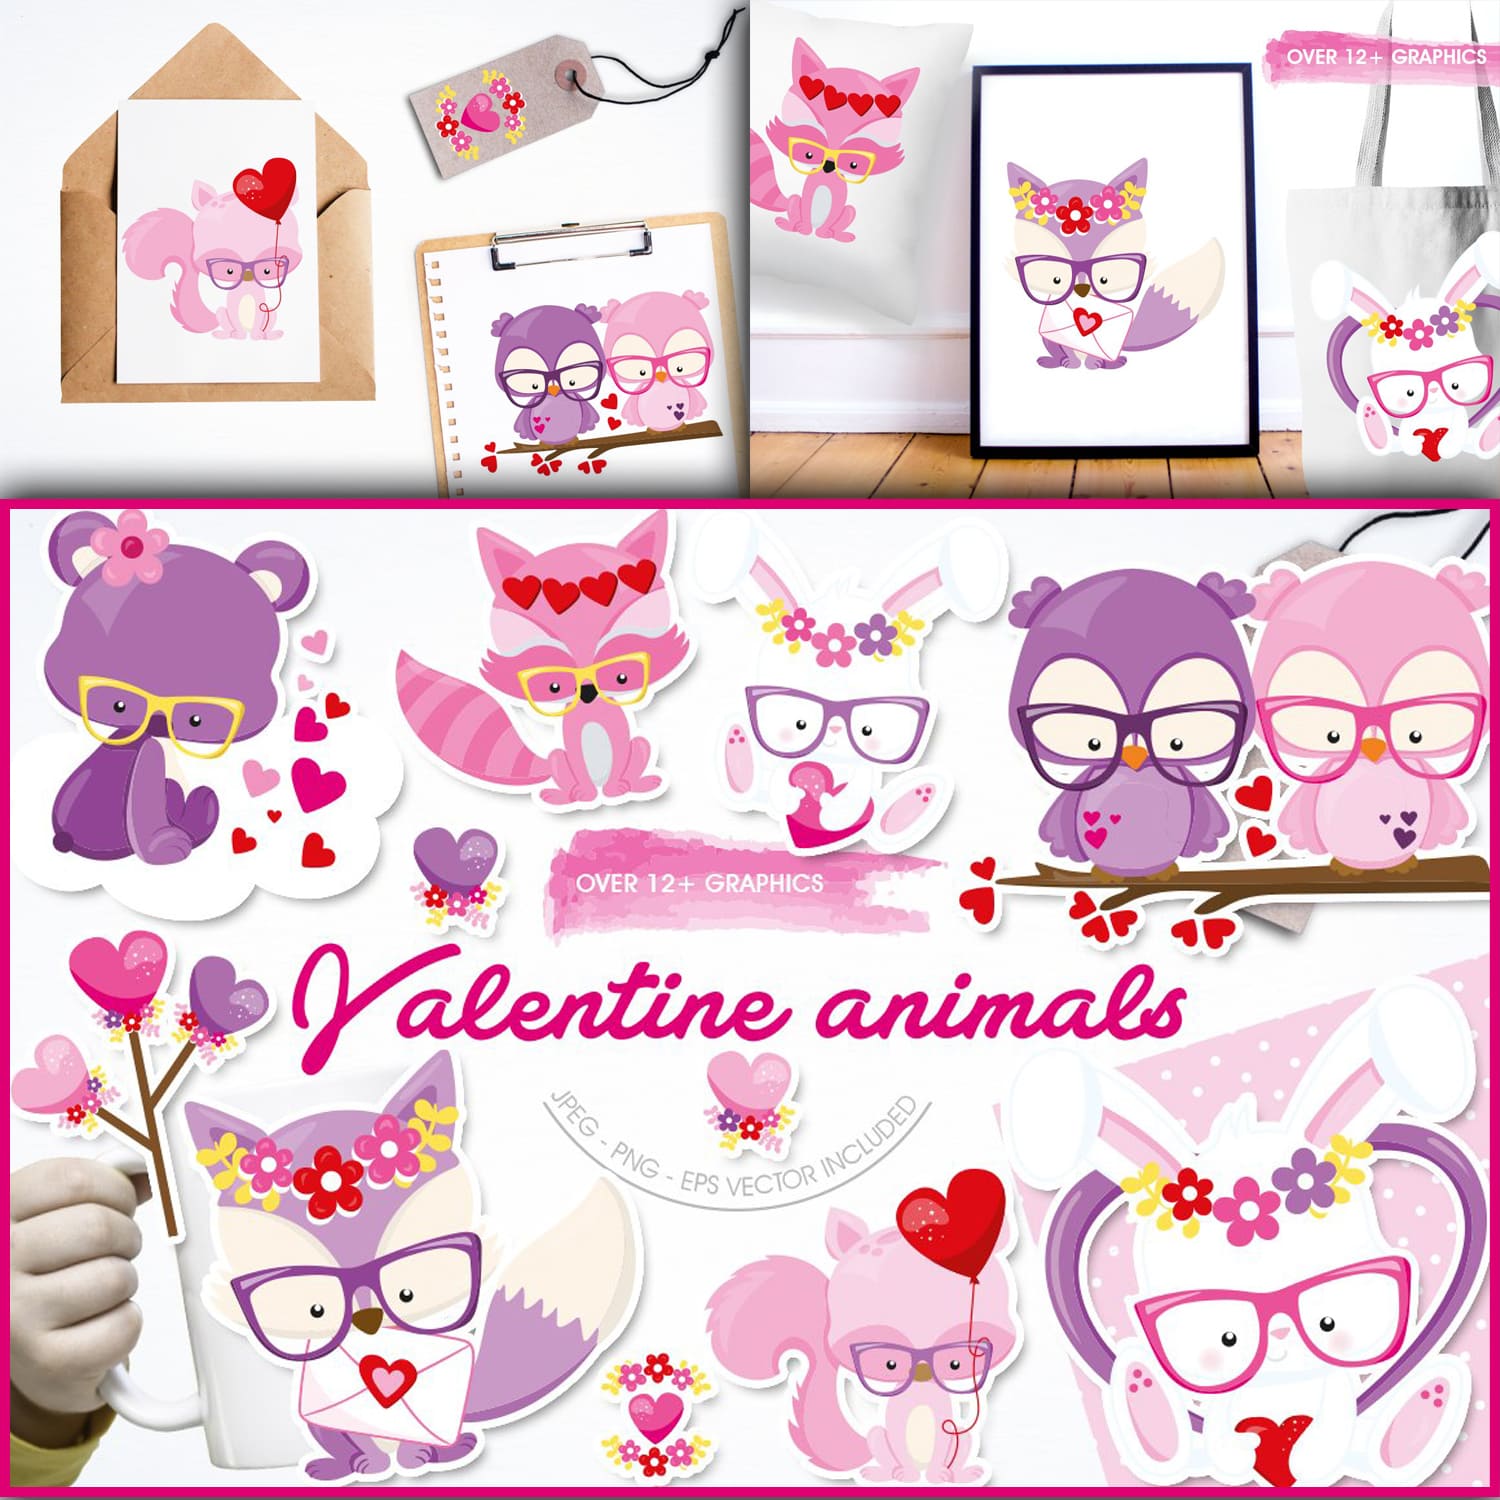 Examples of using animal valentines in design.